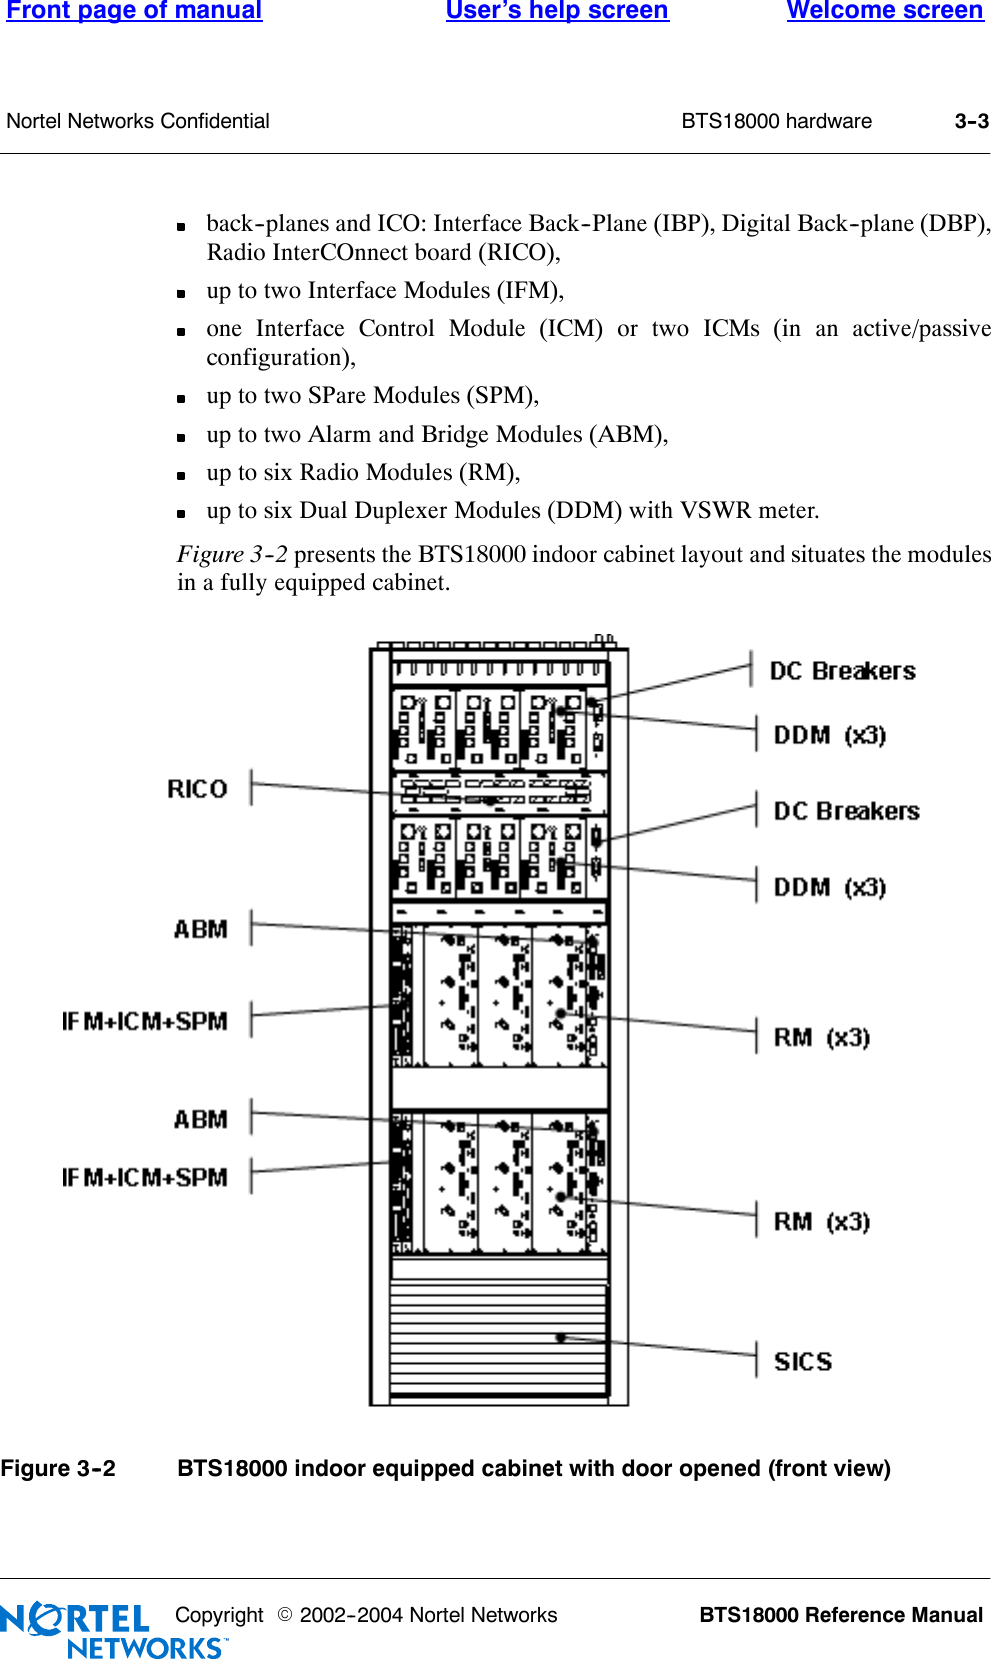 BTS18000 hardwareFront page of manual Welcome screenUser’s help screenNortel Networks Confidential 3--3BTS18000 Reference ManualCopyright E2002--2004 Nortel Networksback--planes and ICO: Interface Back--Plane (IBP), Digital Back--plane (DBP),Radio InterCOnnect board (RICO),up to two Interface Modules (IFM),one Interface Control Module (ICM) or two ICMs (in an active/passiveconfiguration),up to two SPare Modules (SPM),up to two Alarm and Bridge Modules (ABM),up to six Radio Modules (RM),up to six Dual Duplexer Modules (DDM) with VSWR meter.Figure 3--2 presents the BTS18000 indoor cabinet layout and situates the modulesin a fully equipped cabinet.Figure 3--2 BTS18000 indoor equipped cabinet with door opened (front view)